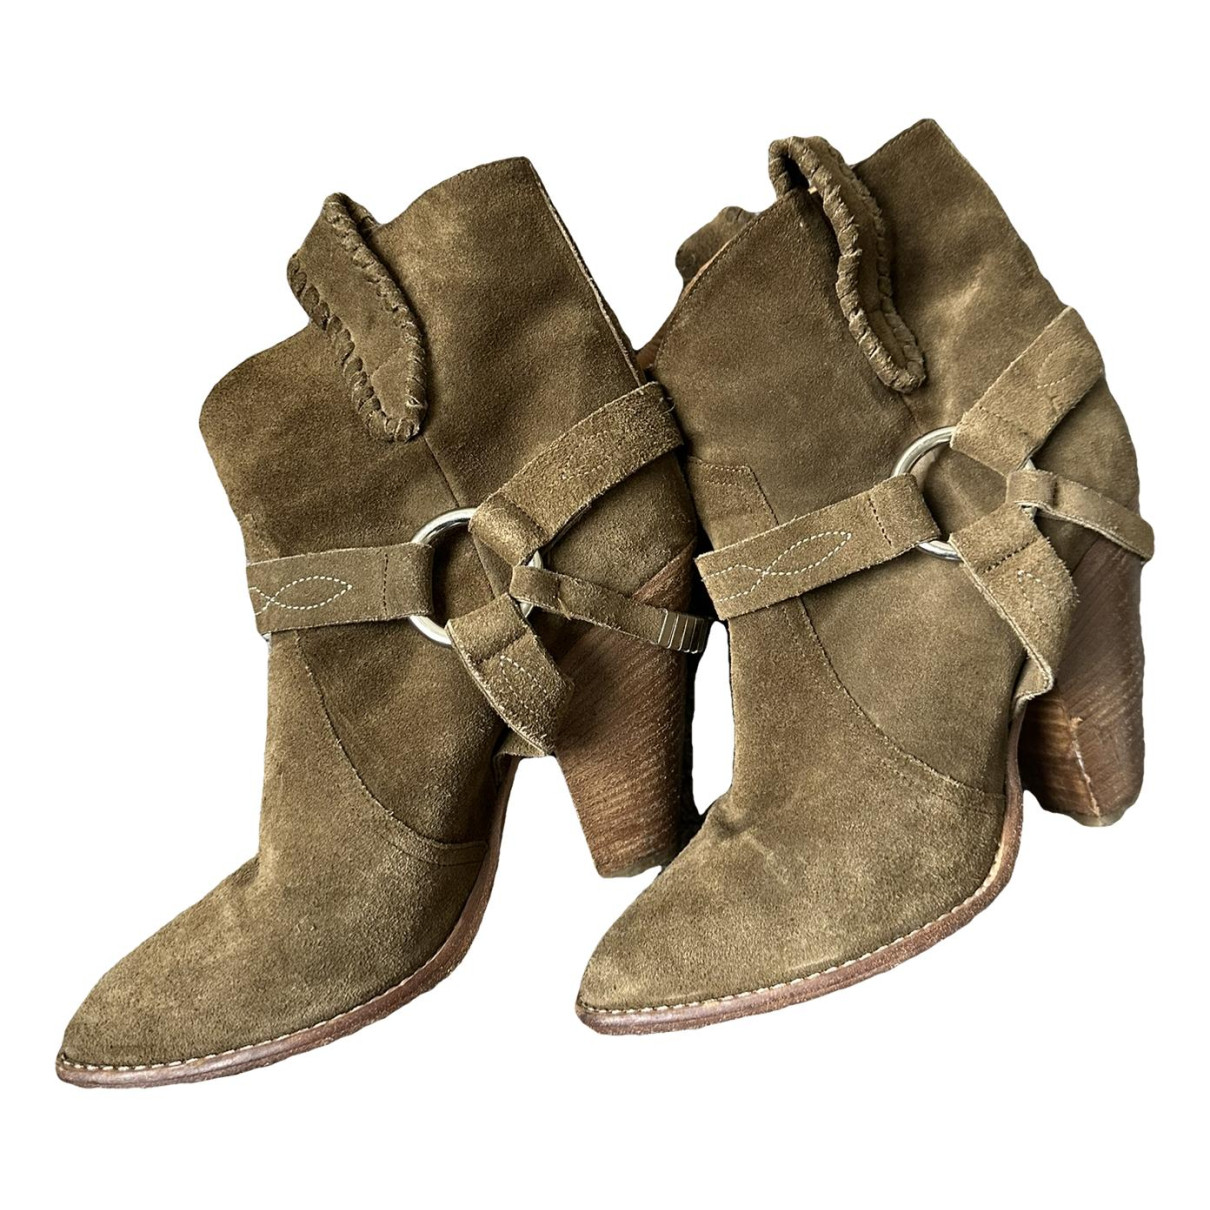 shoes Isabel Marant boots for Female Suede 38 EU. Used condition